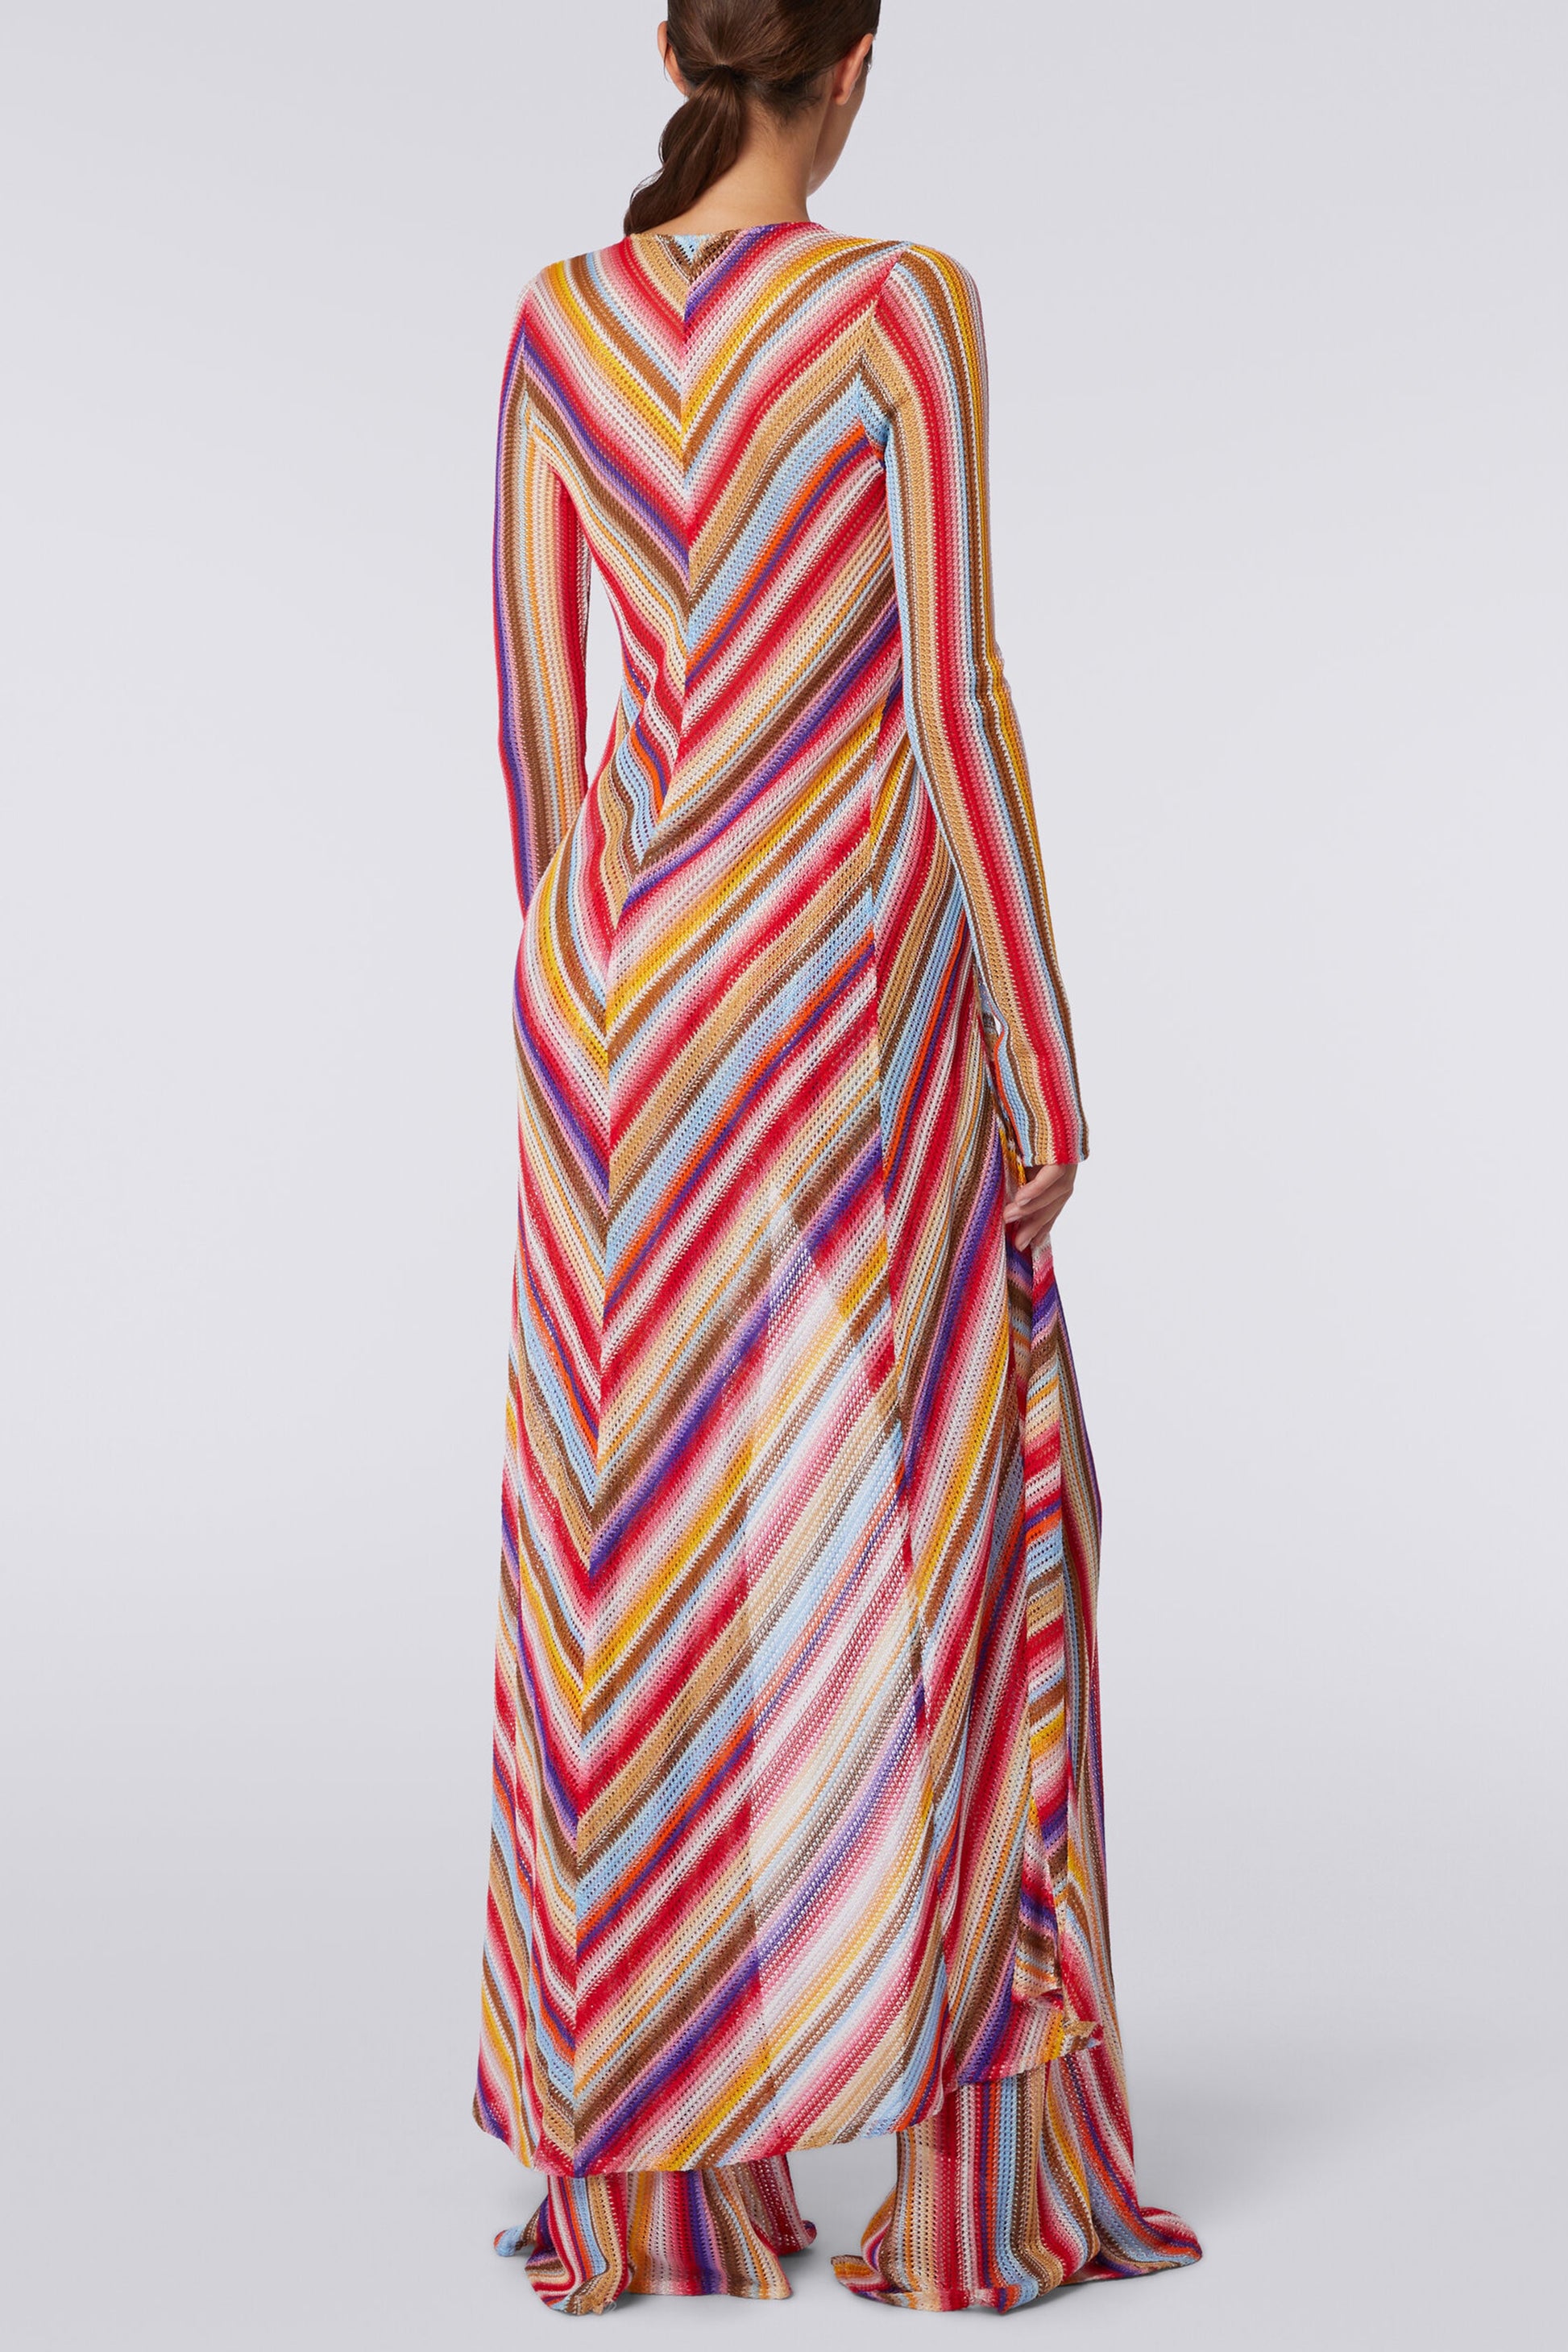 Kleid Cover Up in Red StripeMissoni - Anita Hass